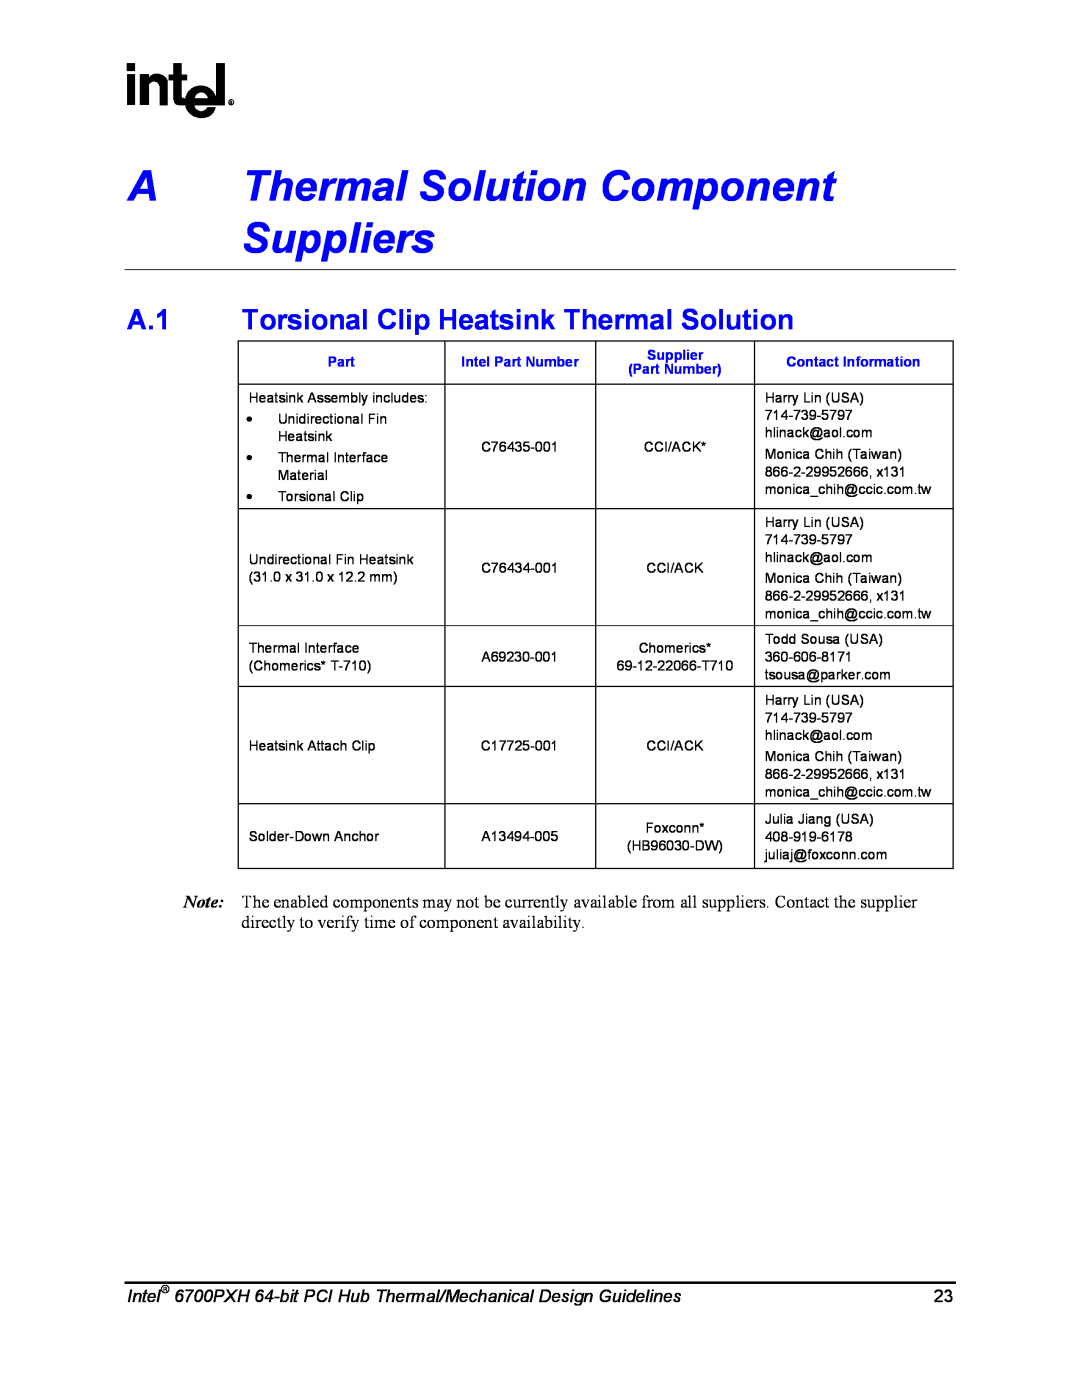 Intel 6700PXH manual A Thermal Solution Component Suppliers, A.1 Torsional Clip Heatsink Thermal Solution, Part 